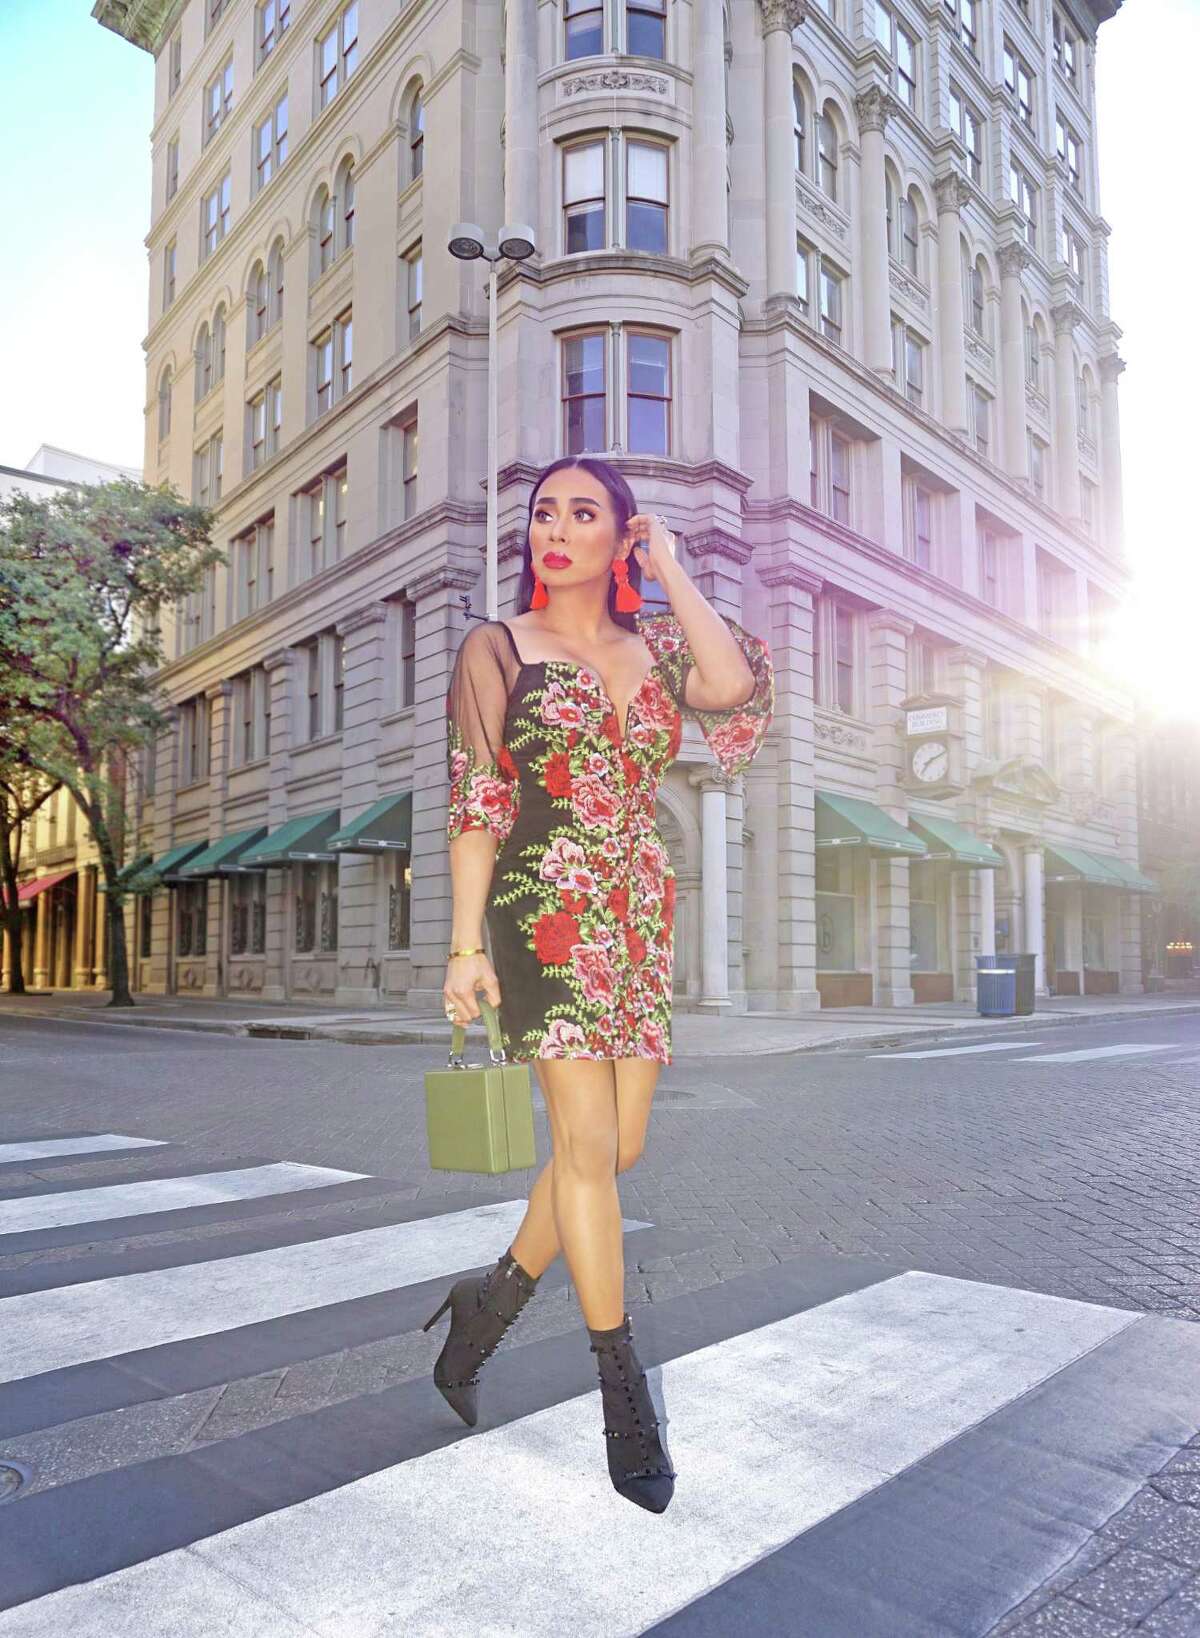 San Antonio fashion blogger Shear Ann Brick, better known as Shear Bear, has more than 145,000 Instagram followers and collaborates with more than 60 national and international brands.